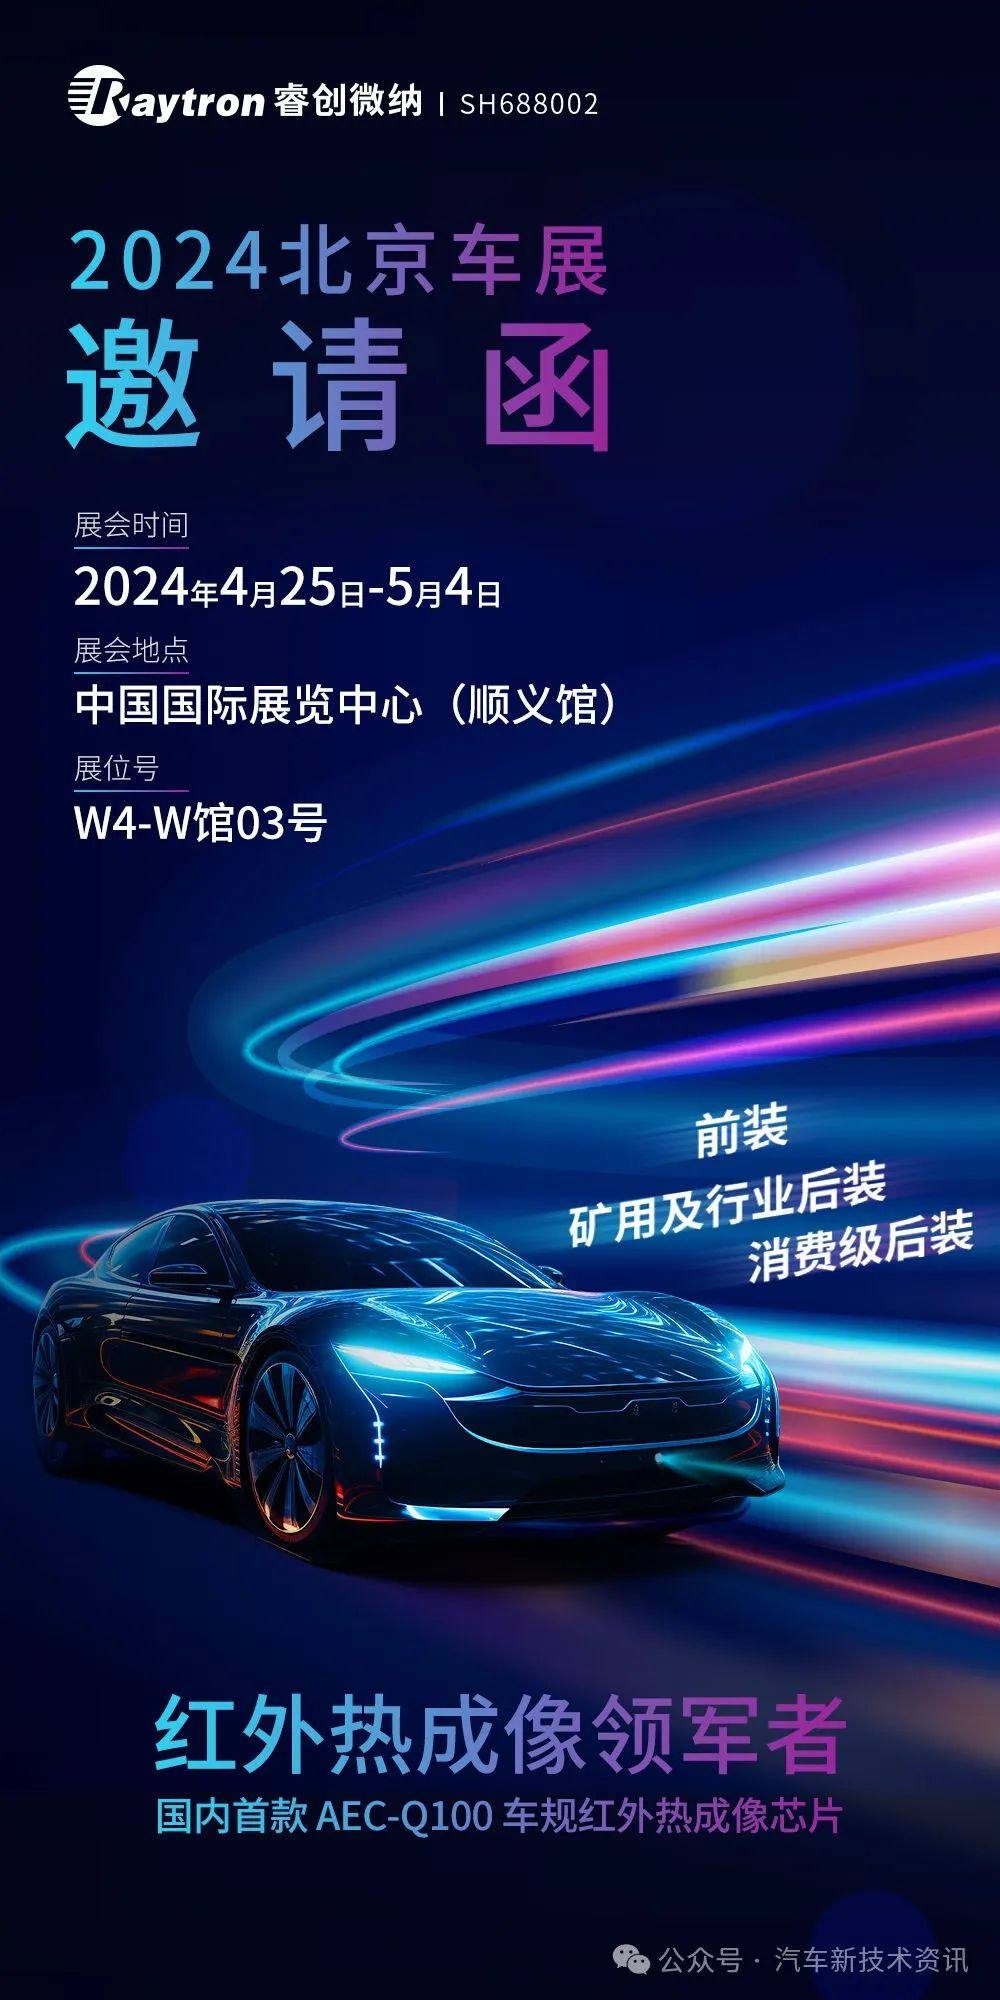 These well-known auto parts companies will appear at the 2024 Beijing Auto Show